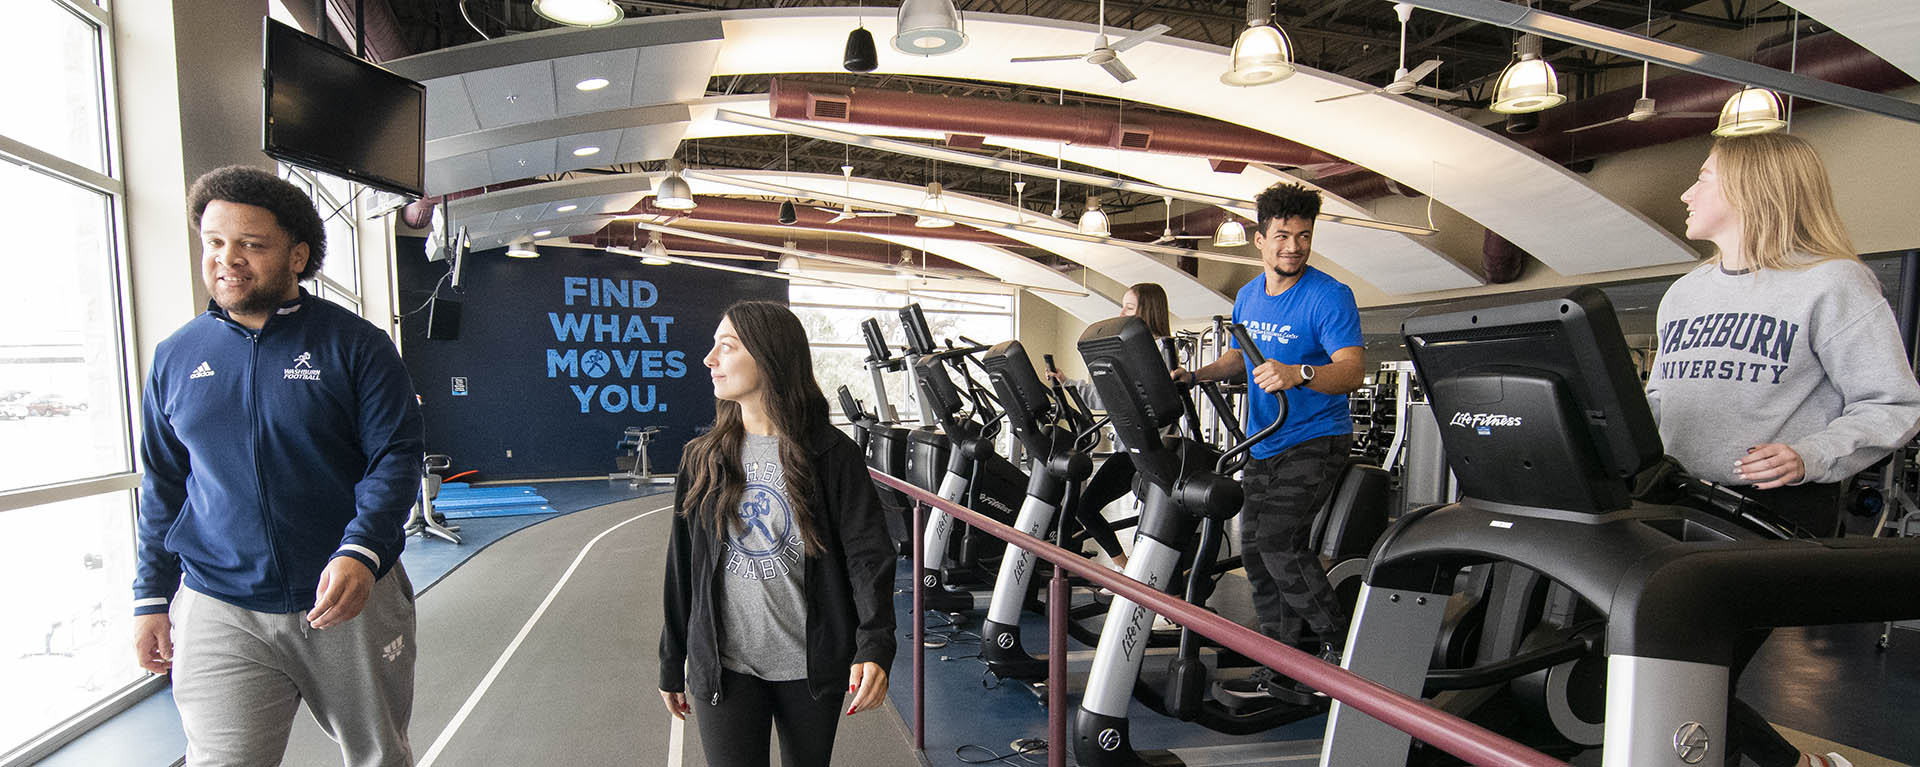 Students walk the track while others workout in the fitness loft at the SRWC.